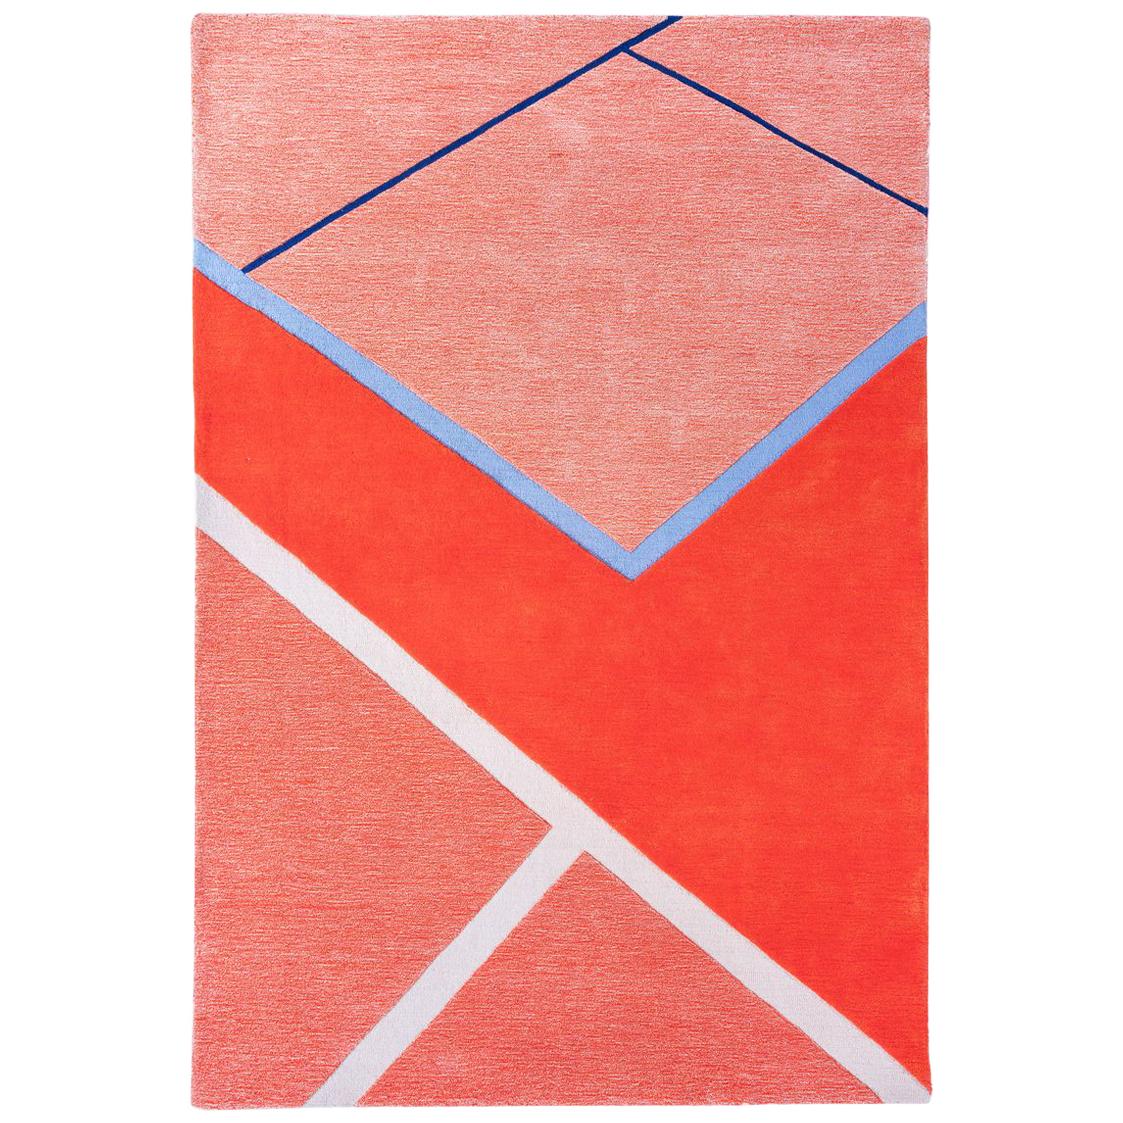 "Court Series" Field House Rug by Pieces, Modern Hand-Tufted Colorful Red Carpet